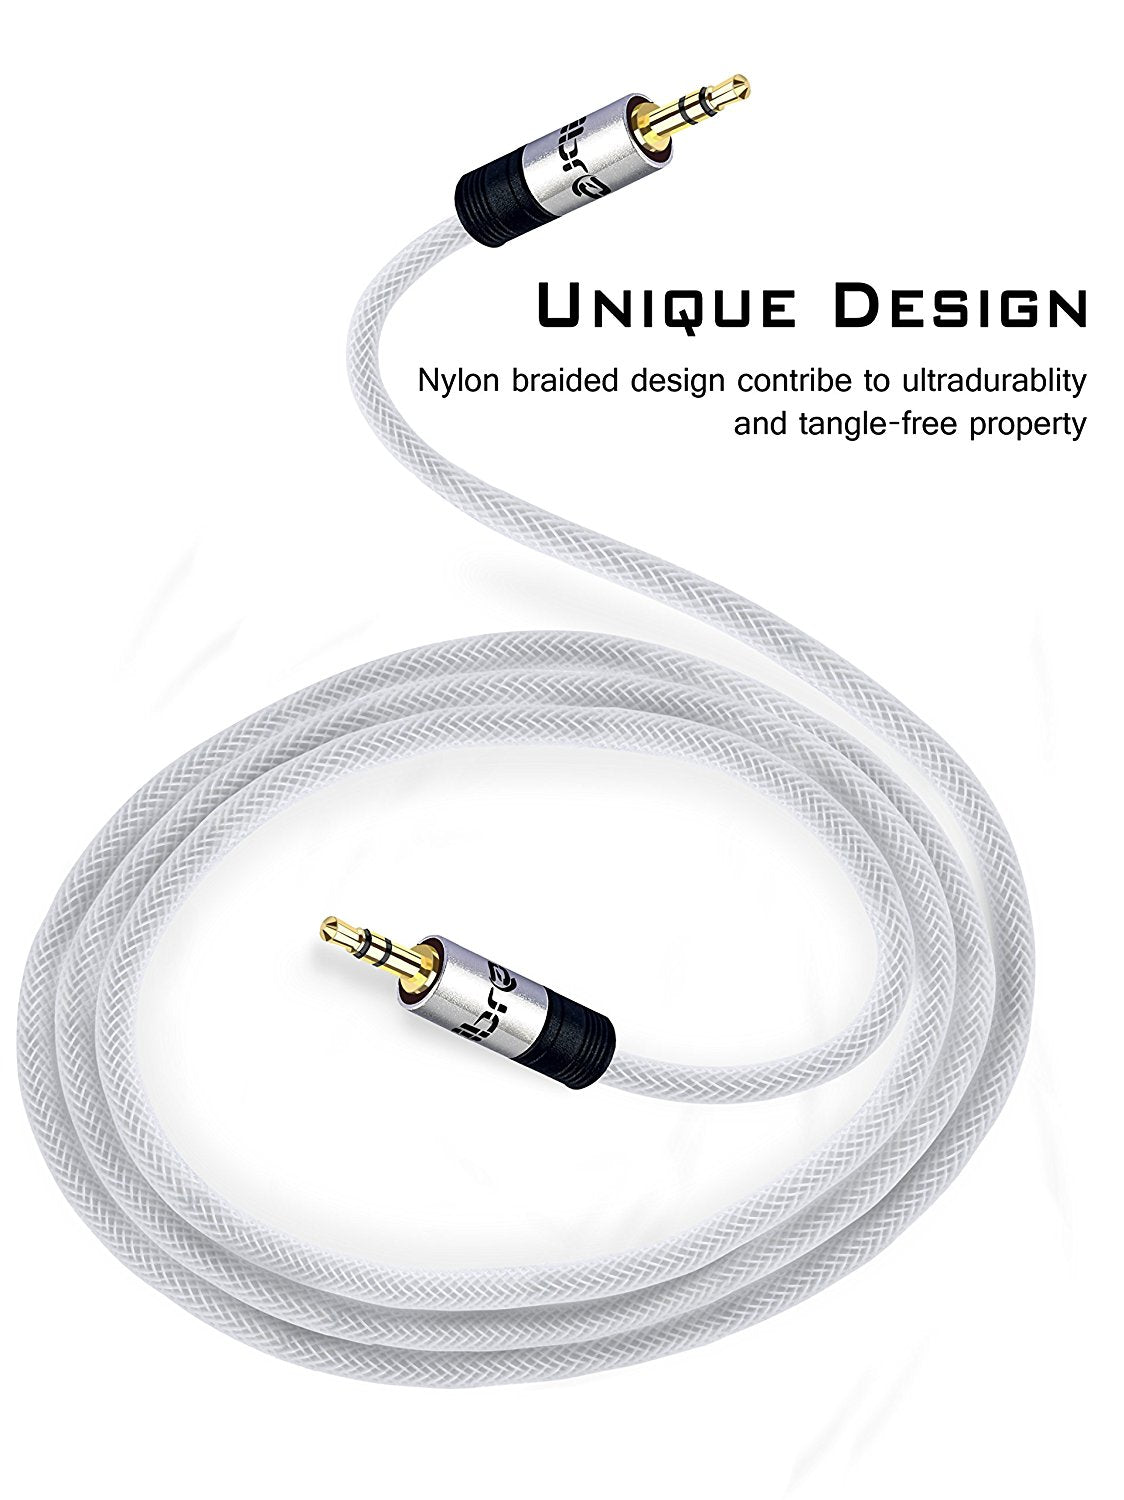 3.5mm Stereo Jack to Jack Audio Cable Lead Gold 2m- IBRA Silver Series